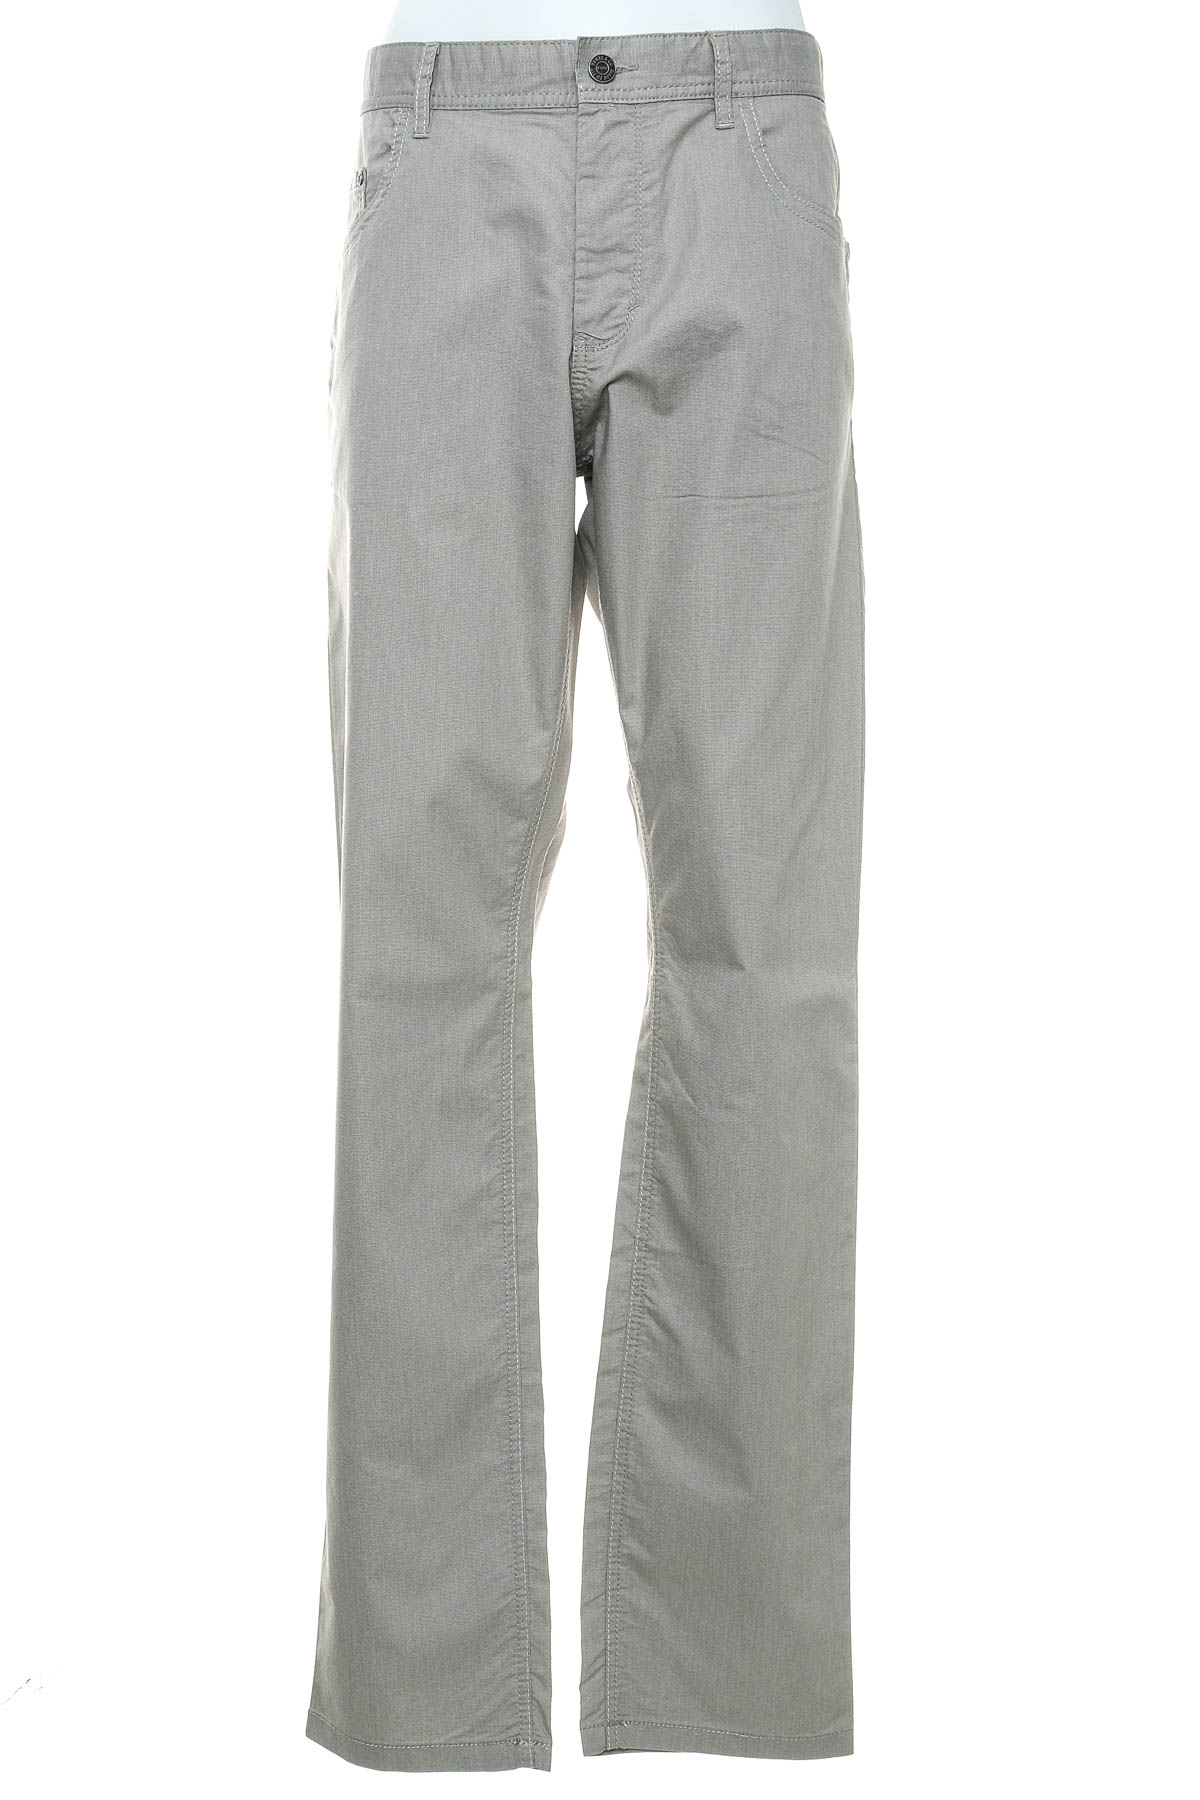 Men's trousers - RAY - 0